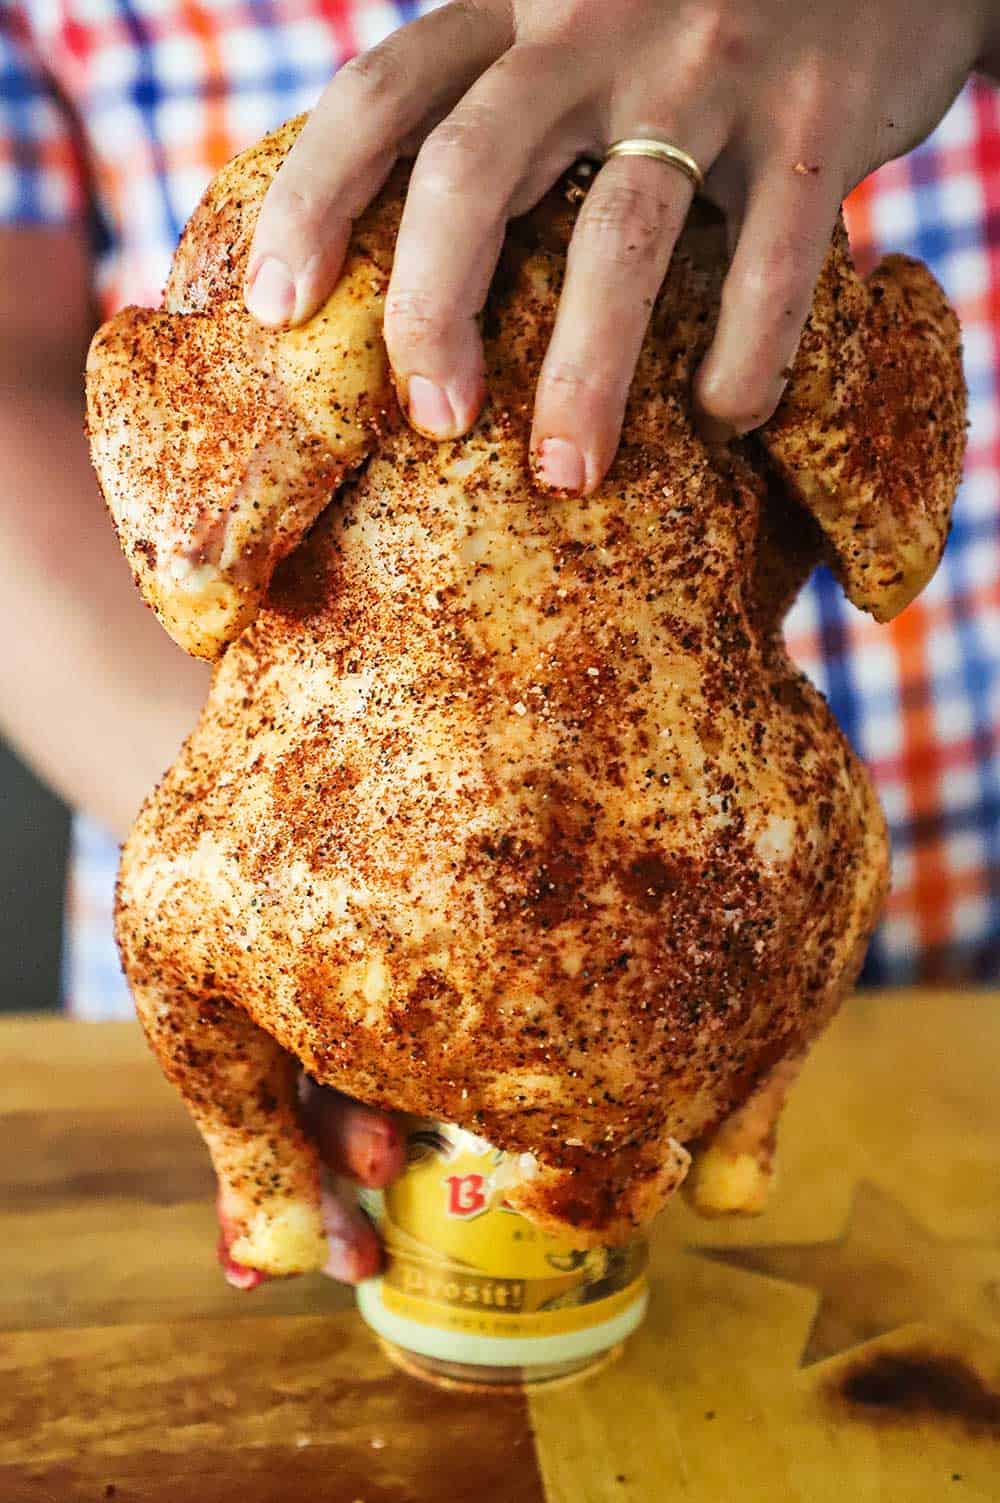 A person placing a seasoned whole uncooked chicken onto a beer can sitting on a cutting board